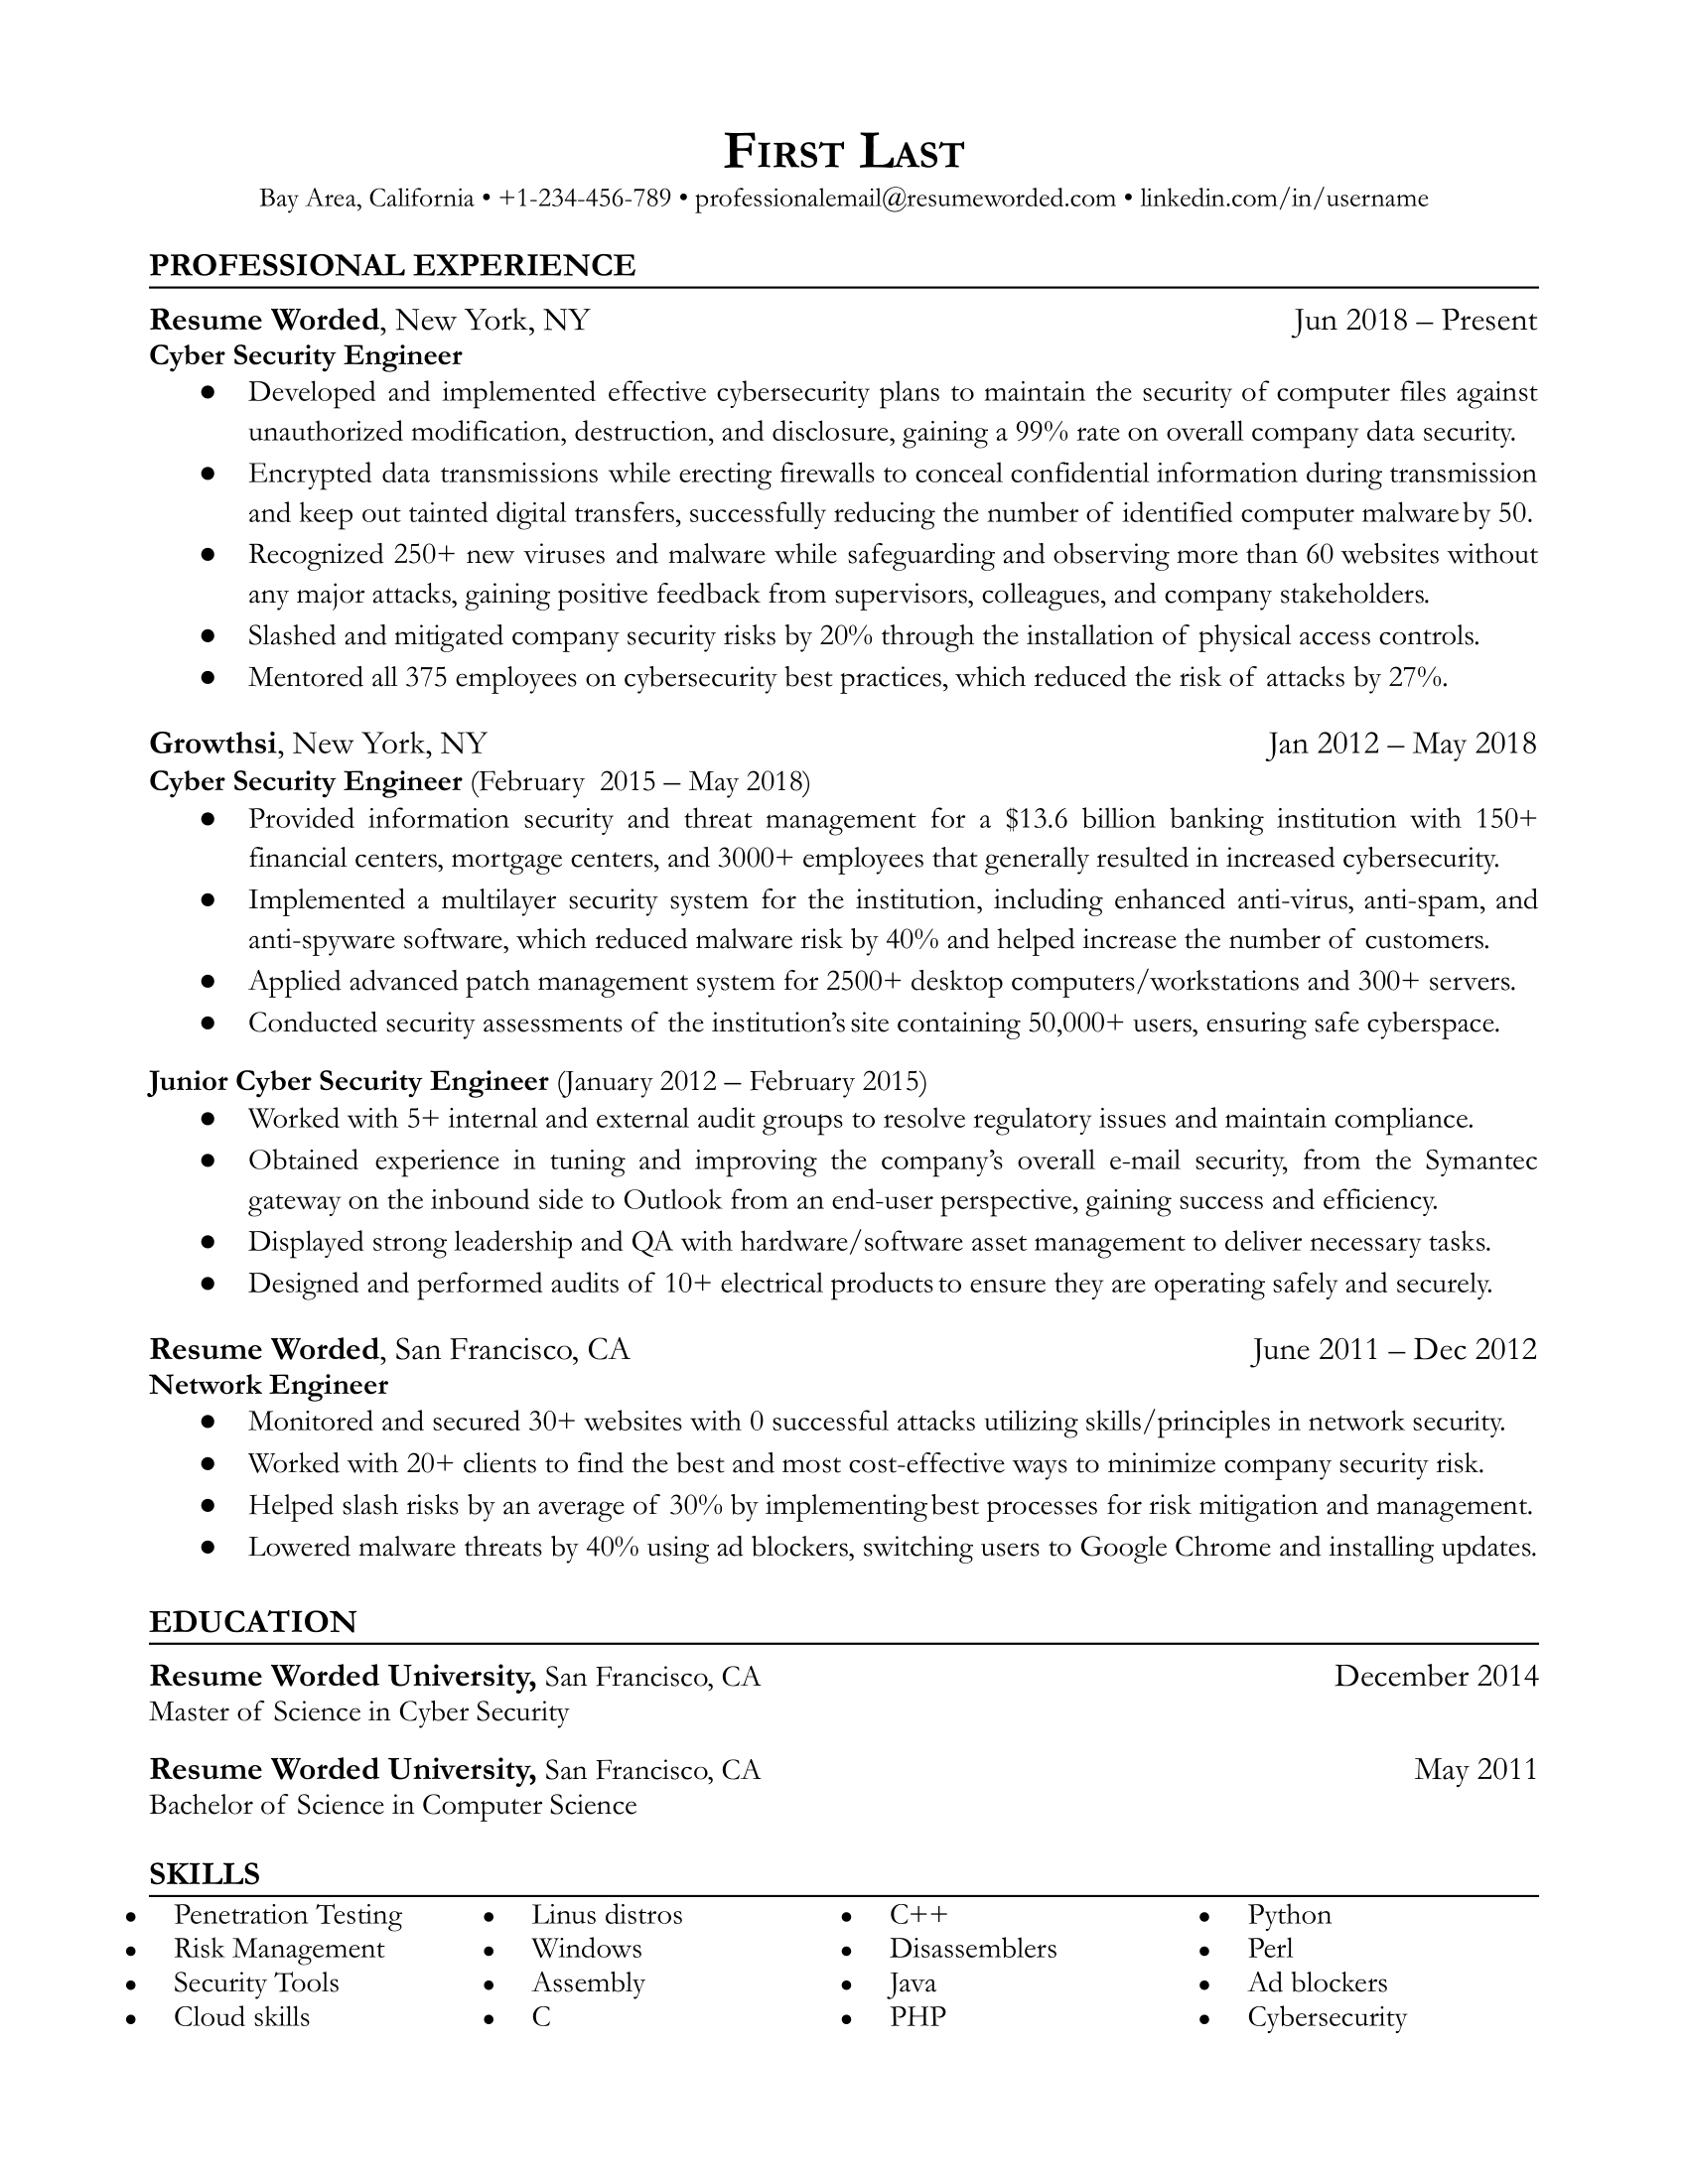 A Cyber Security Engineer's detailed resume showcasing certifications, relevant experiences, and technical skills.